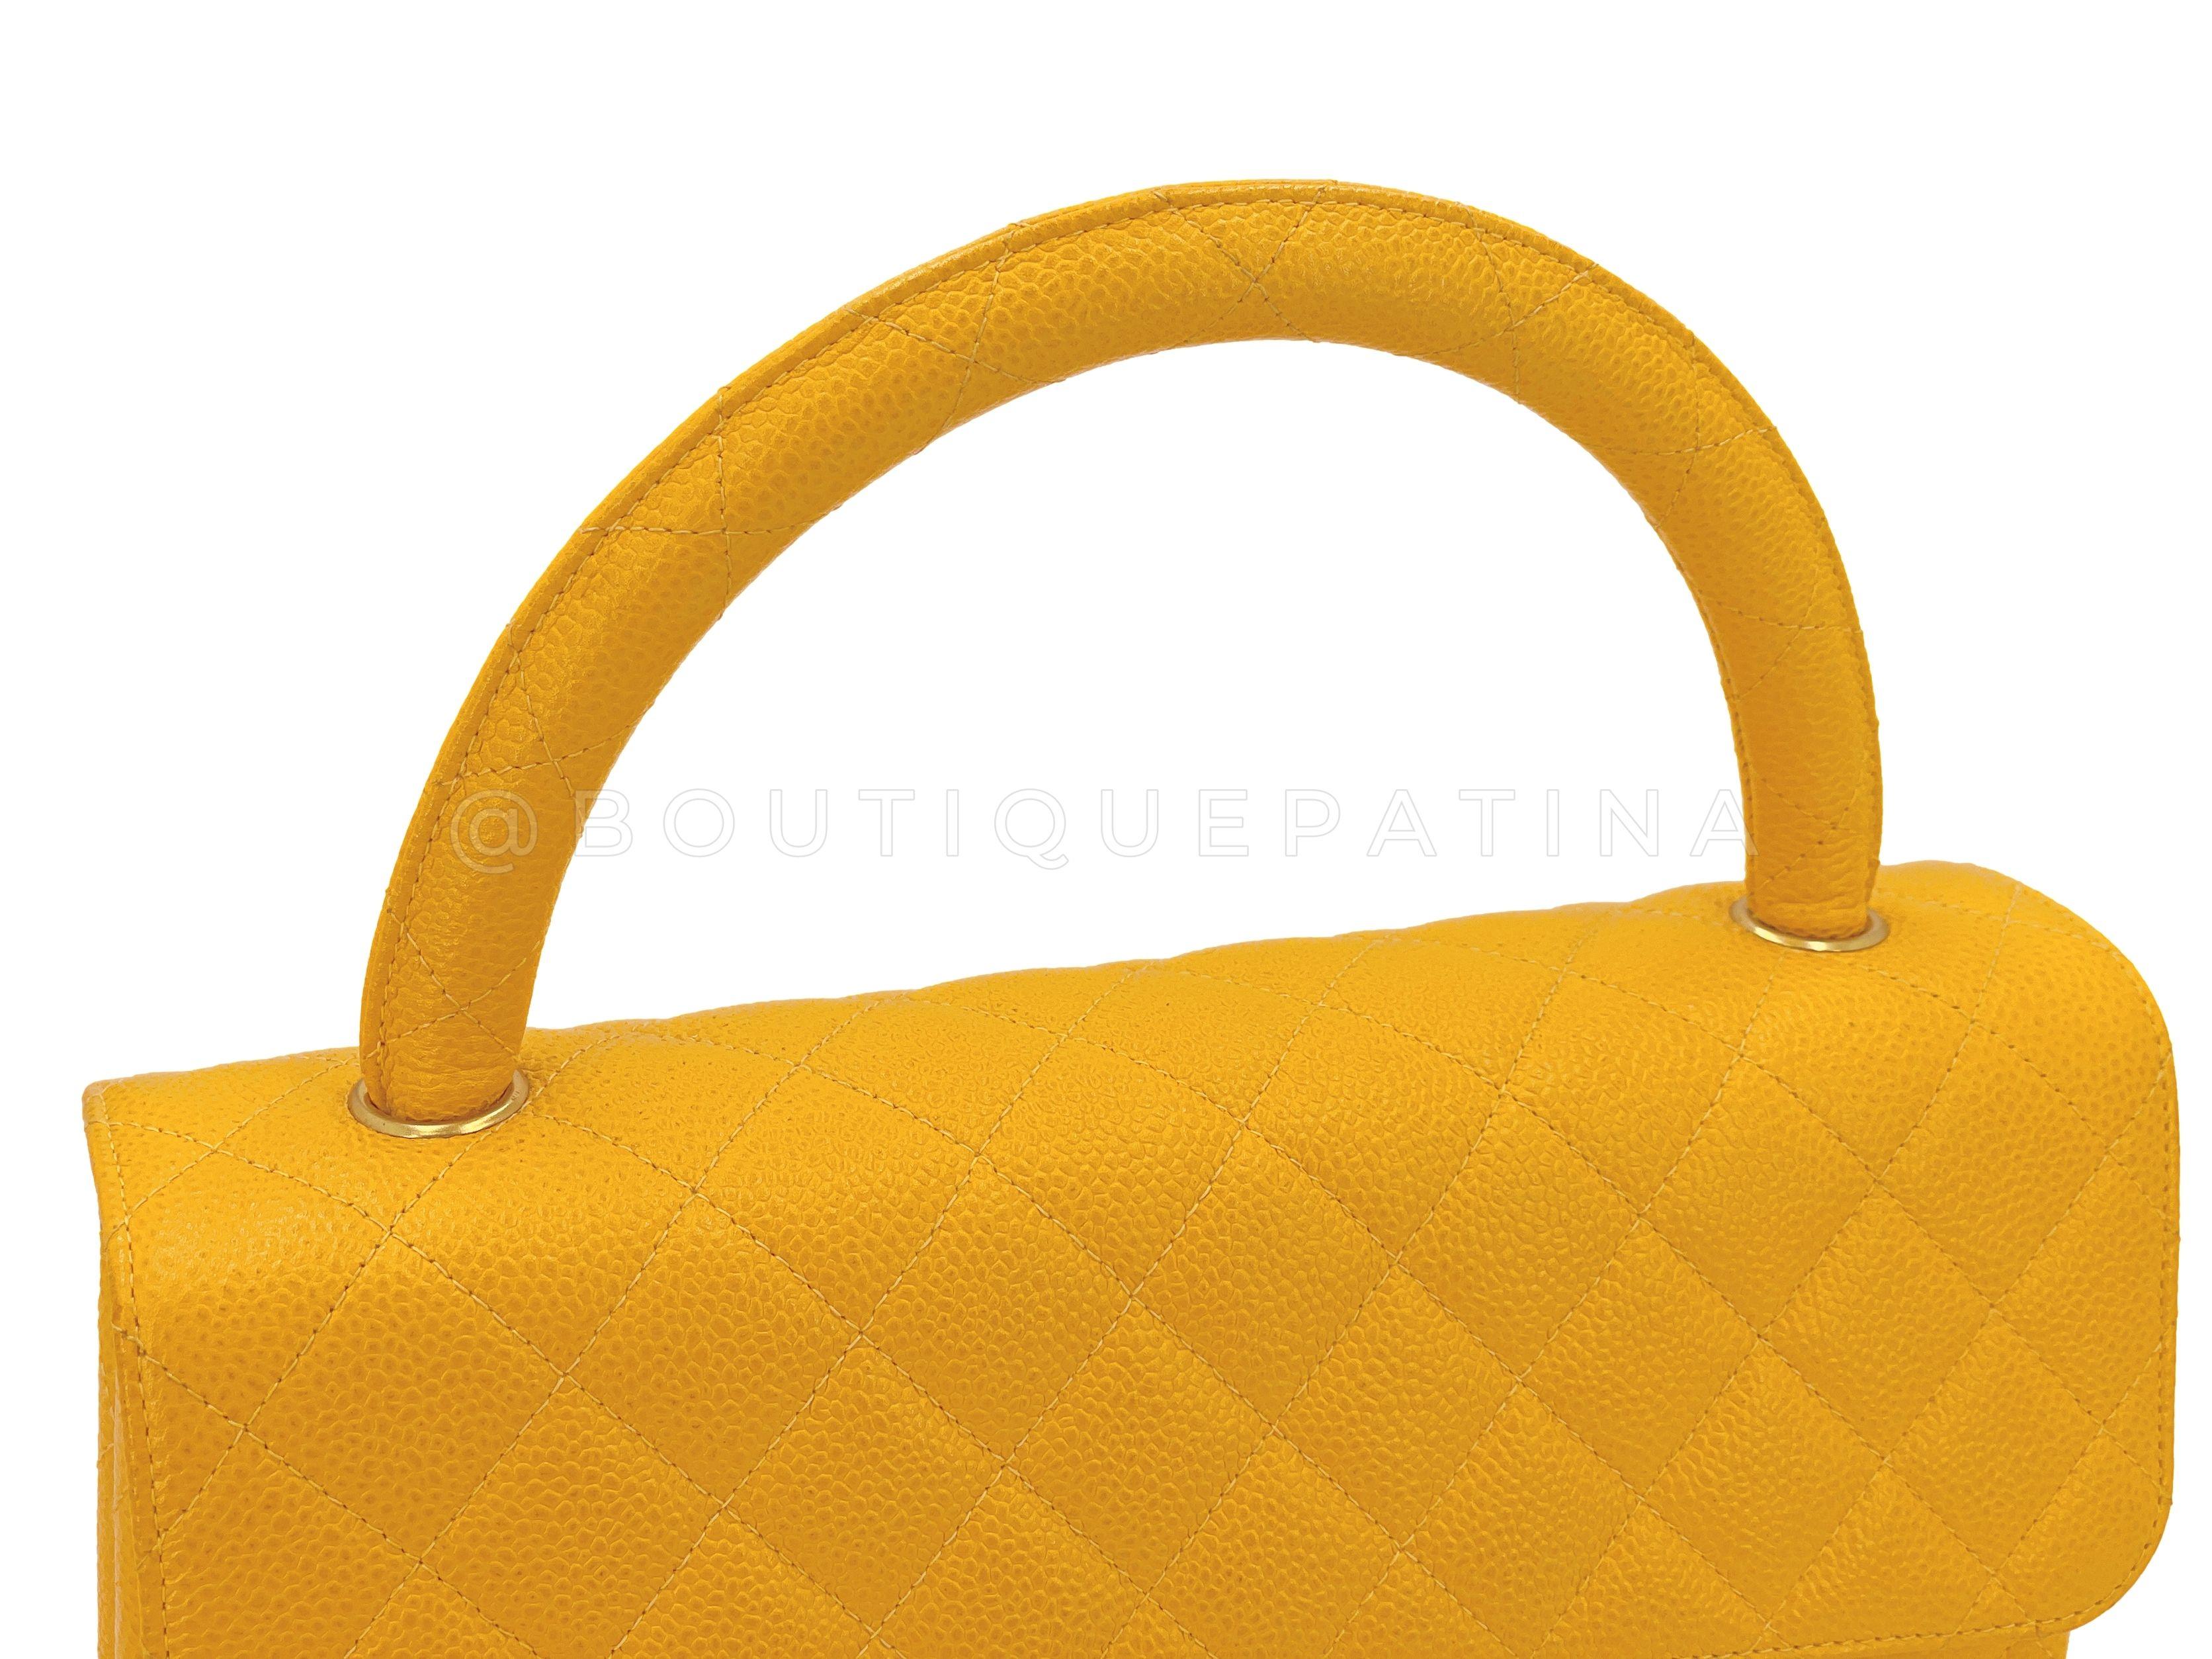 Chanel 1997 Vintage Canary Yellow Caviar Kelly Flap Parent Bag 24k GHW 66771 In Excellent Condition For Sale In Costa Mesa, CA